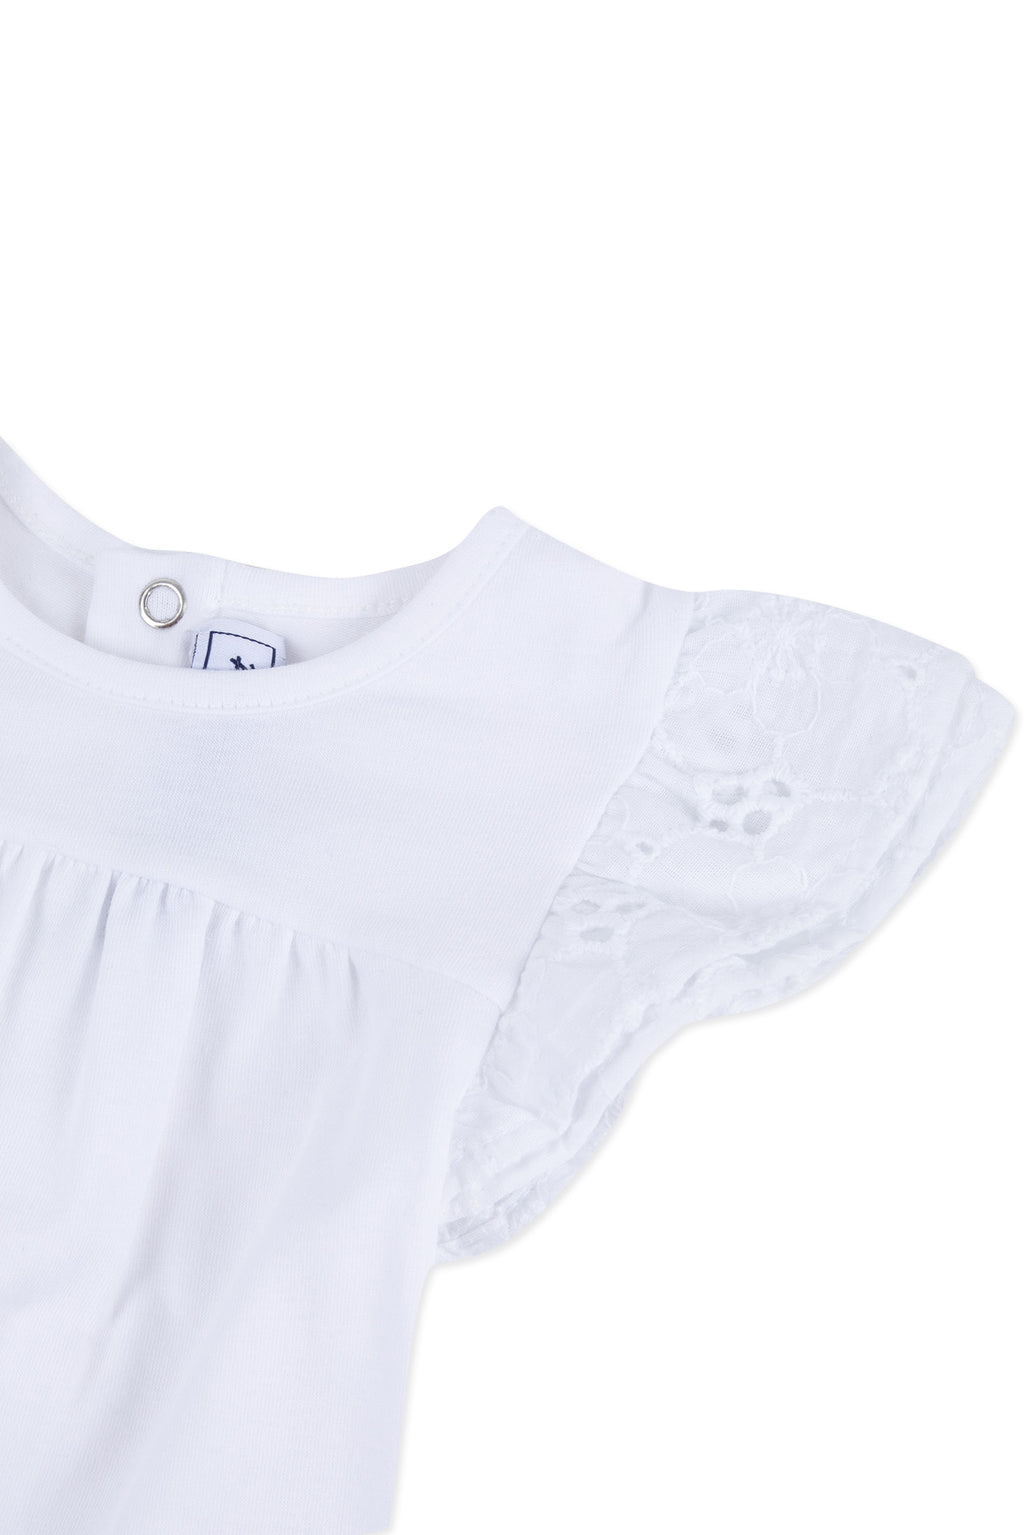 T-shirt - White Flotted sleeves